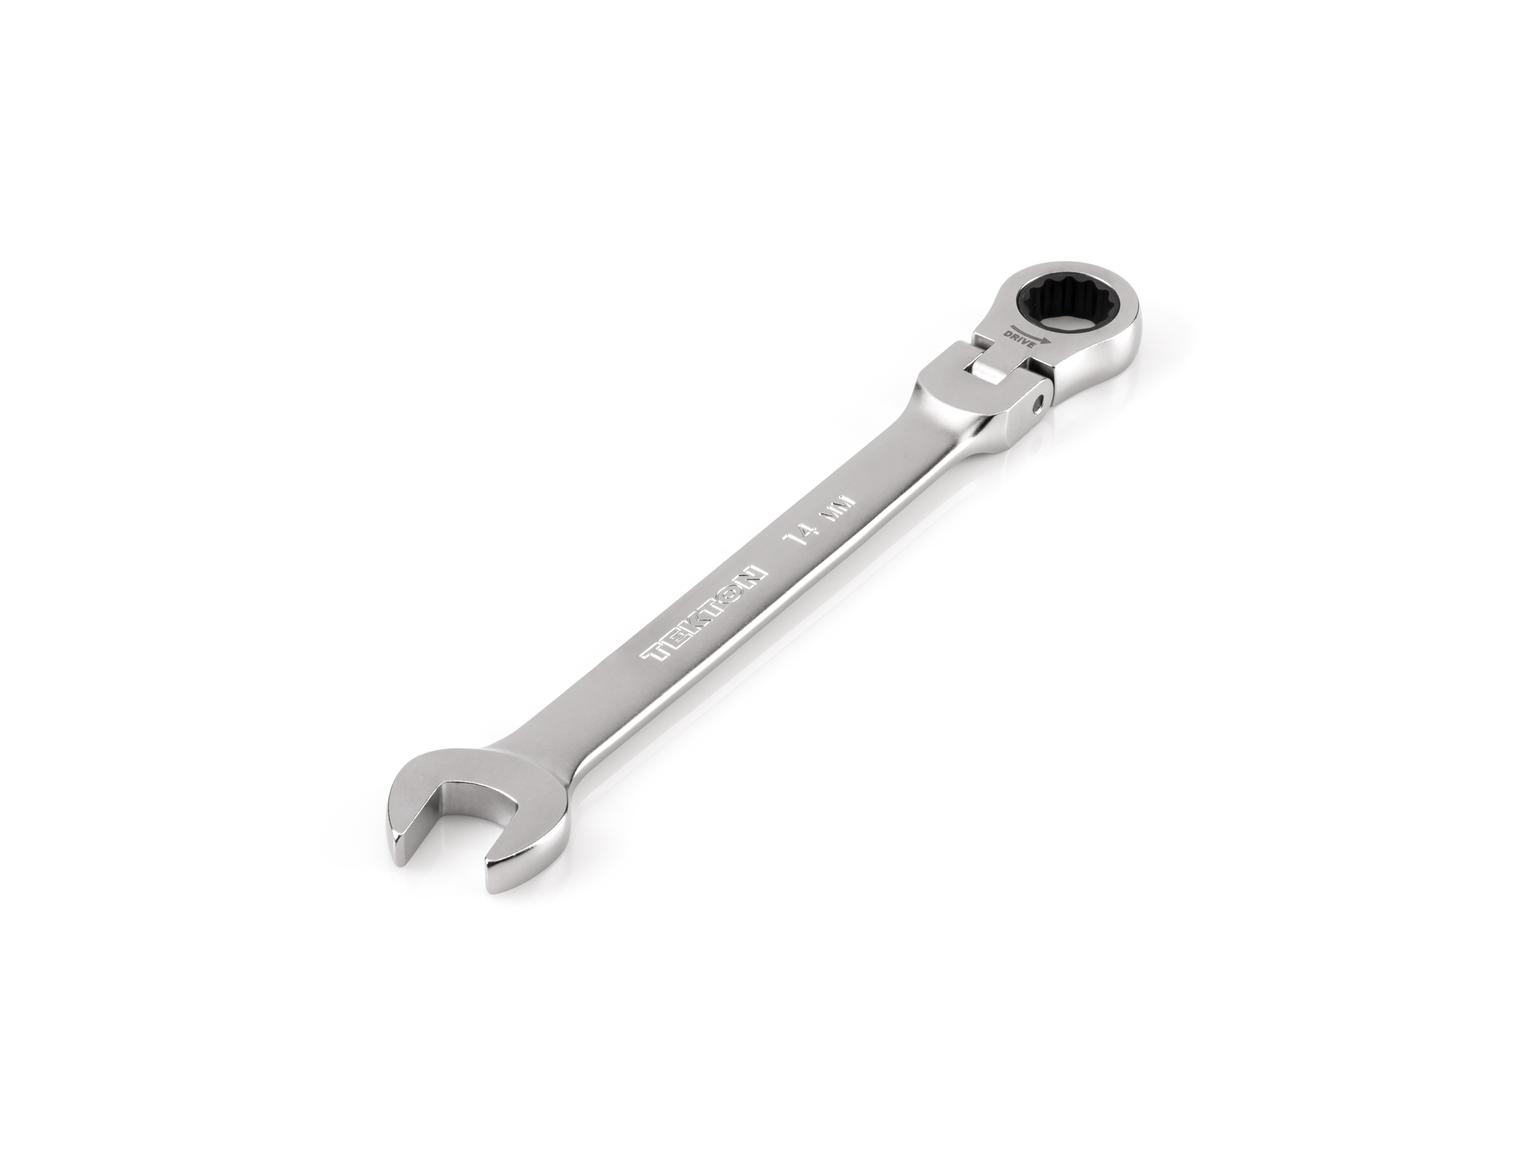 TEKTON WRC26414-T 14 mm Flex Head 12-Point Ratcheting Combination Wrench